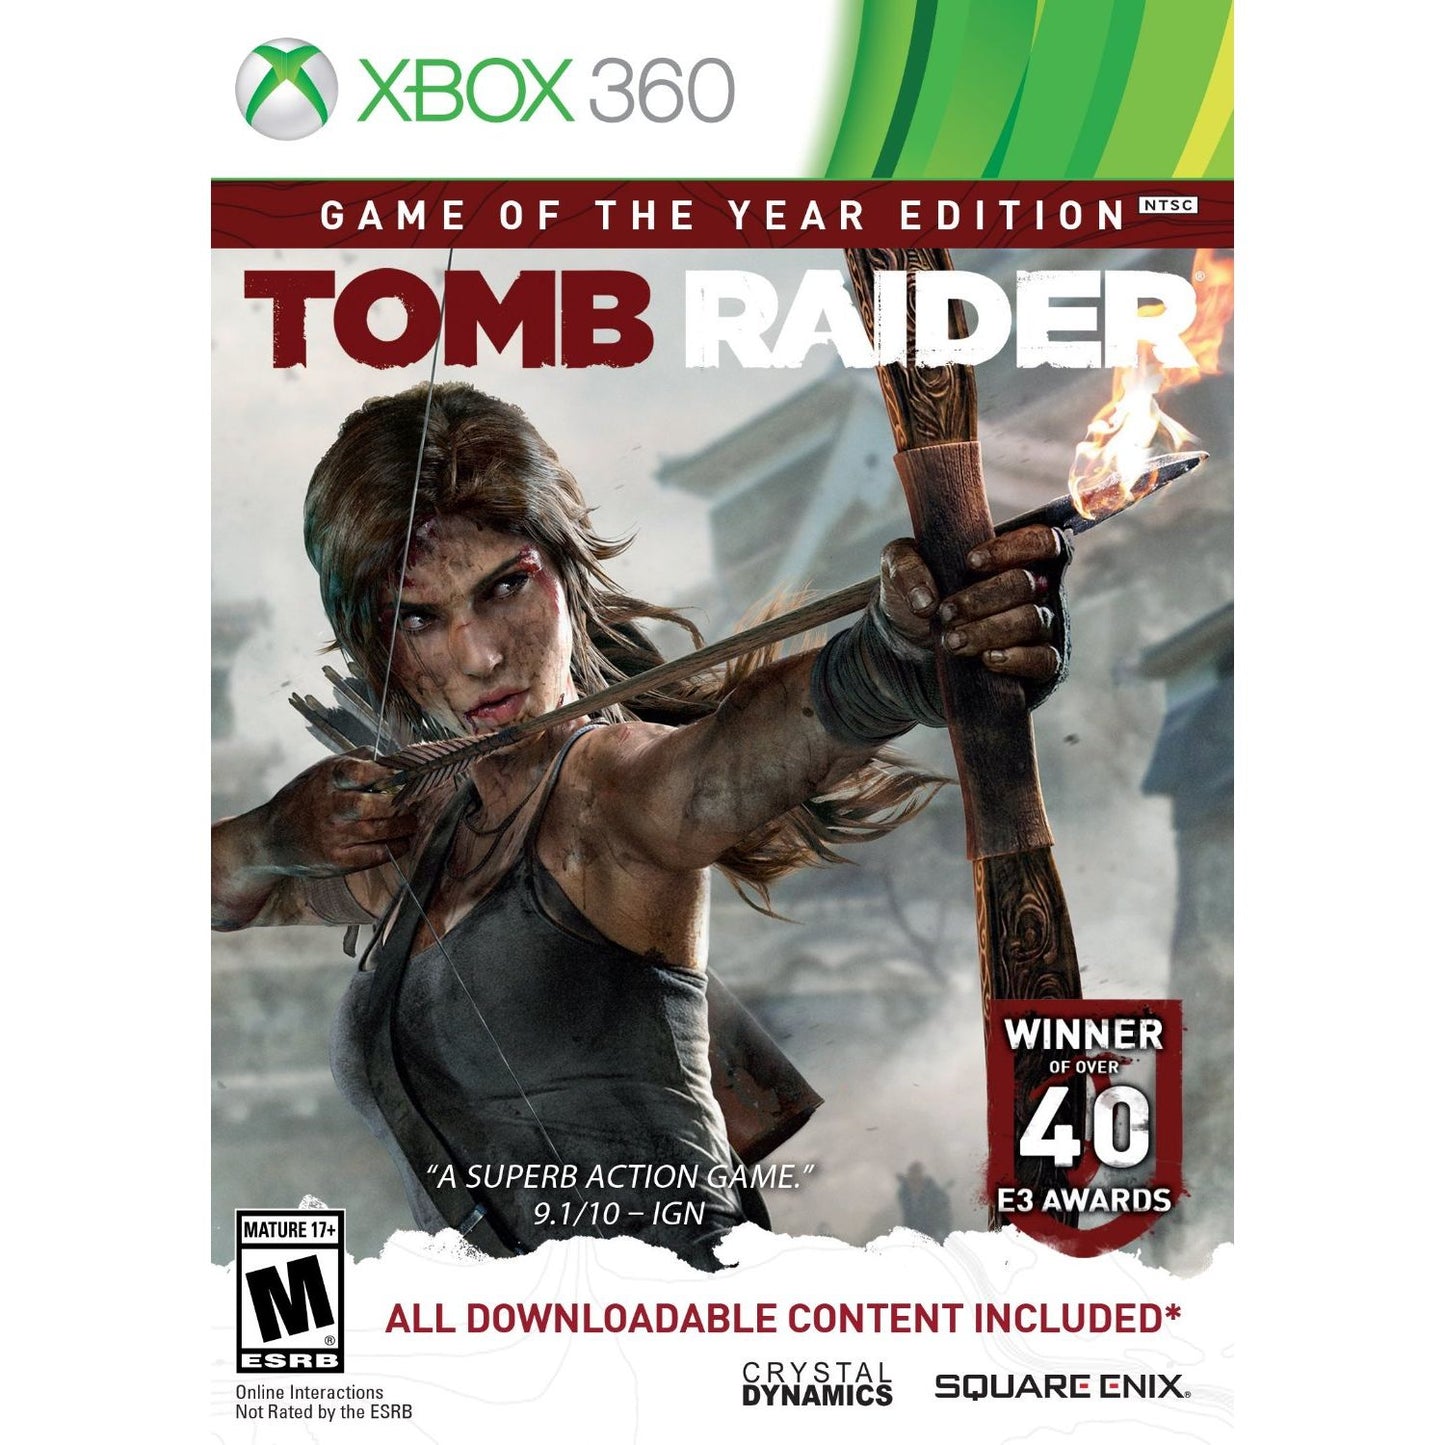 TOMB RAIDER - GAME OF THE YEAR EDITION (used)